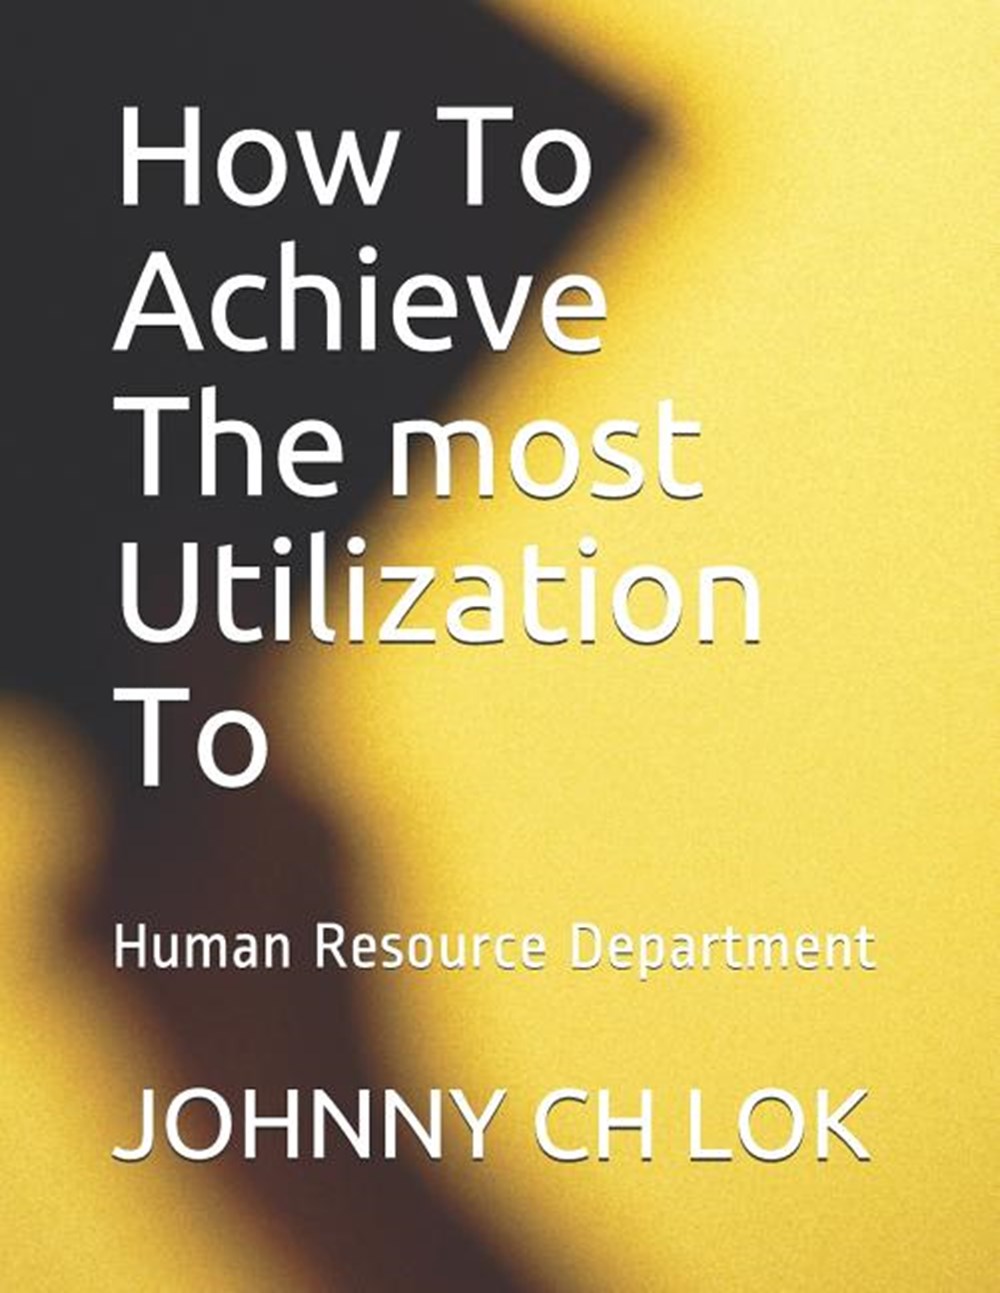 How To Achieve The most Utilization: To Human Resource Department